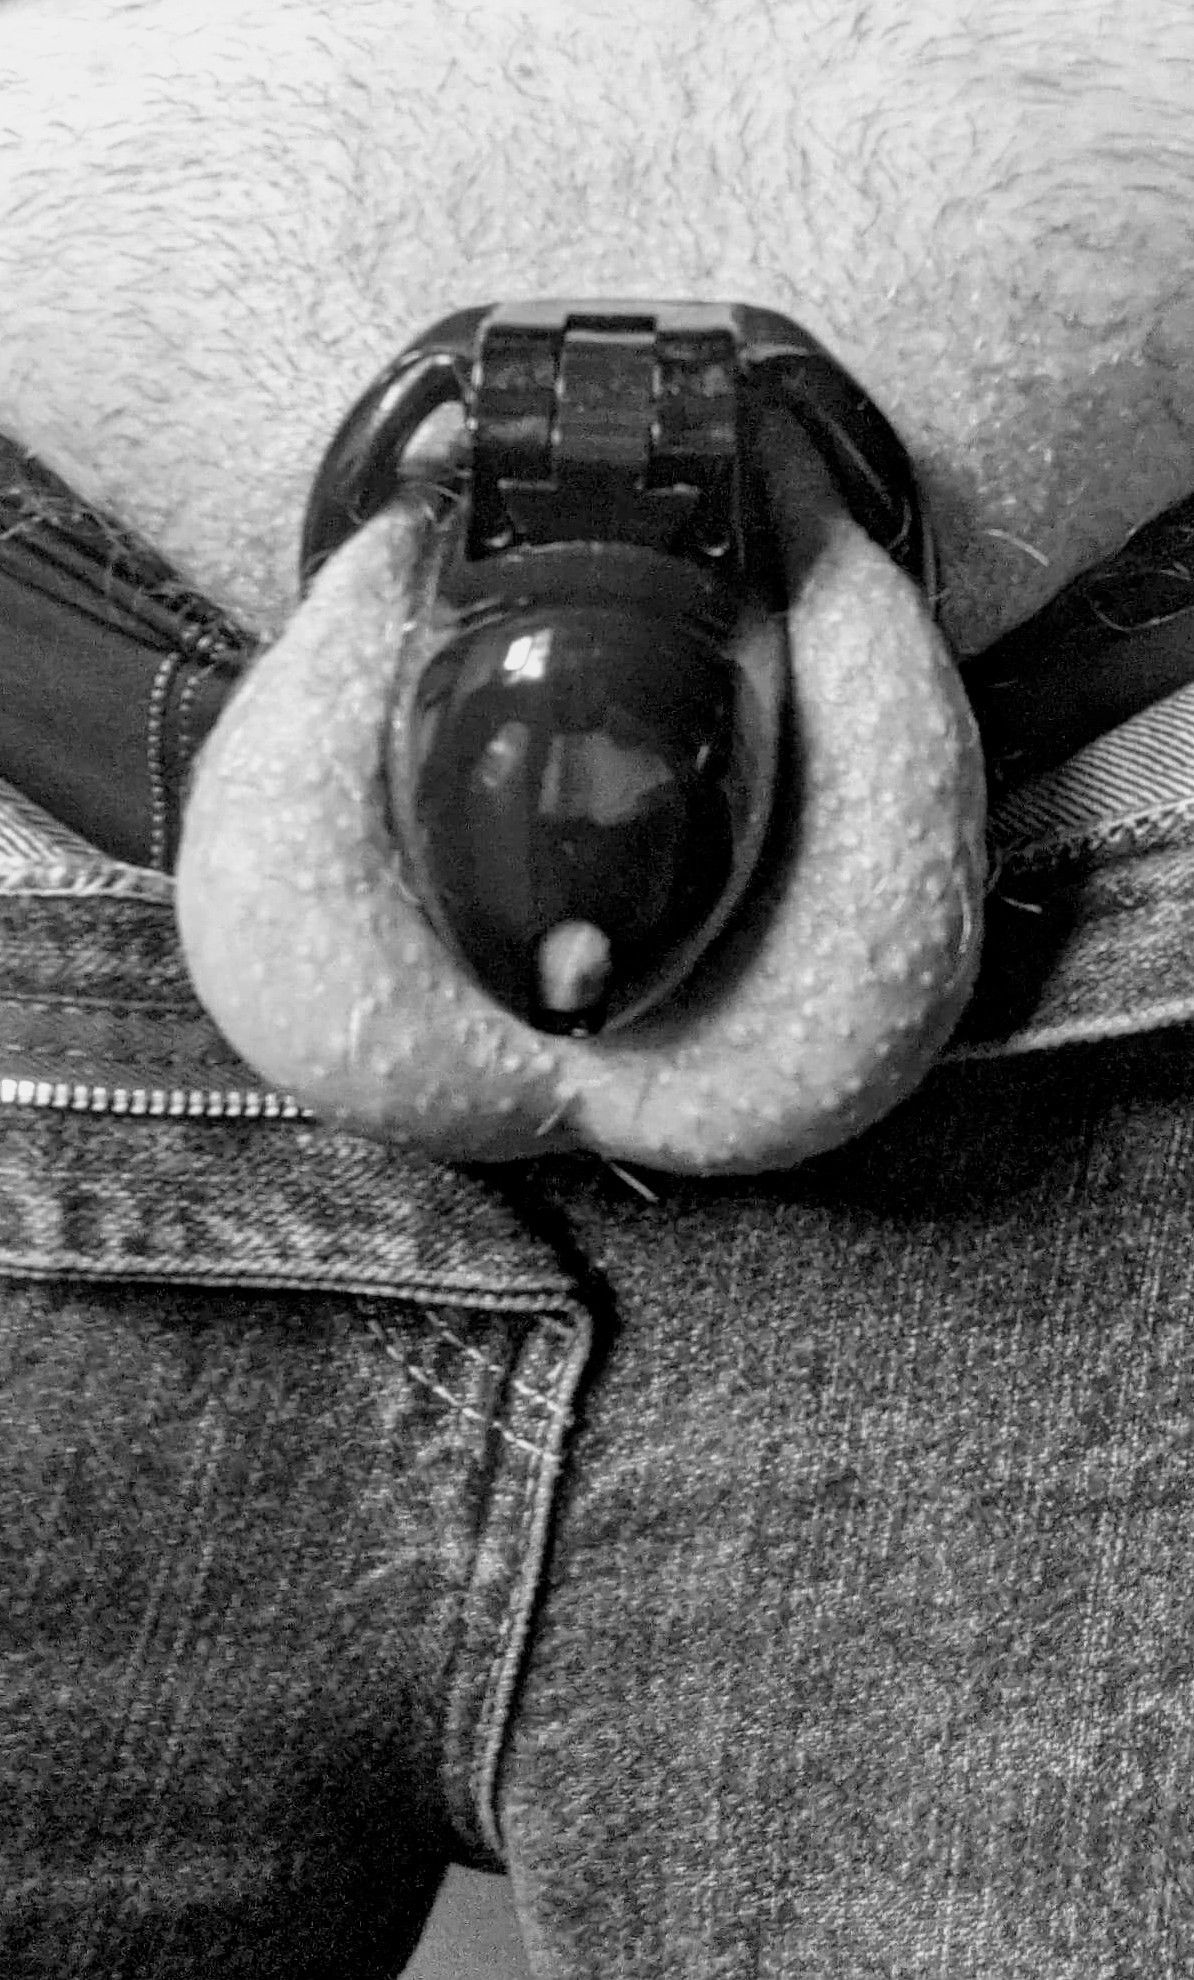 Watch the Photo by Mistressladyfriend with the username @Mistressladyfriend, who is a verified user, posted on September 23, 2020. The post is about the topic Male Chastity.